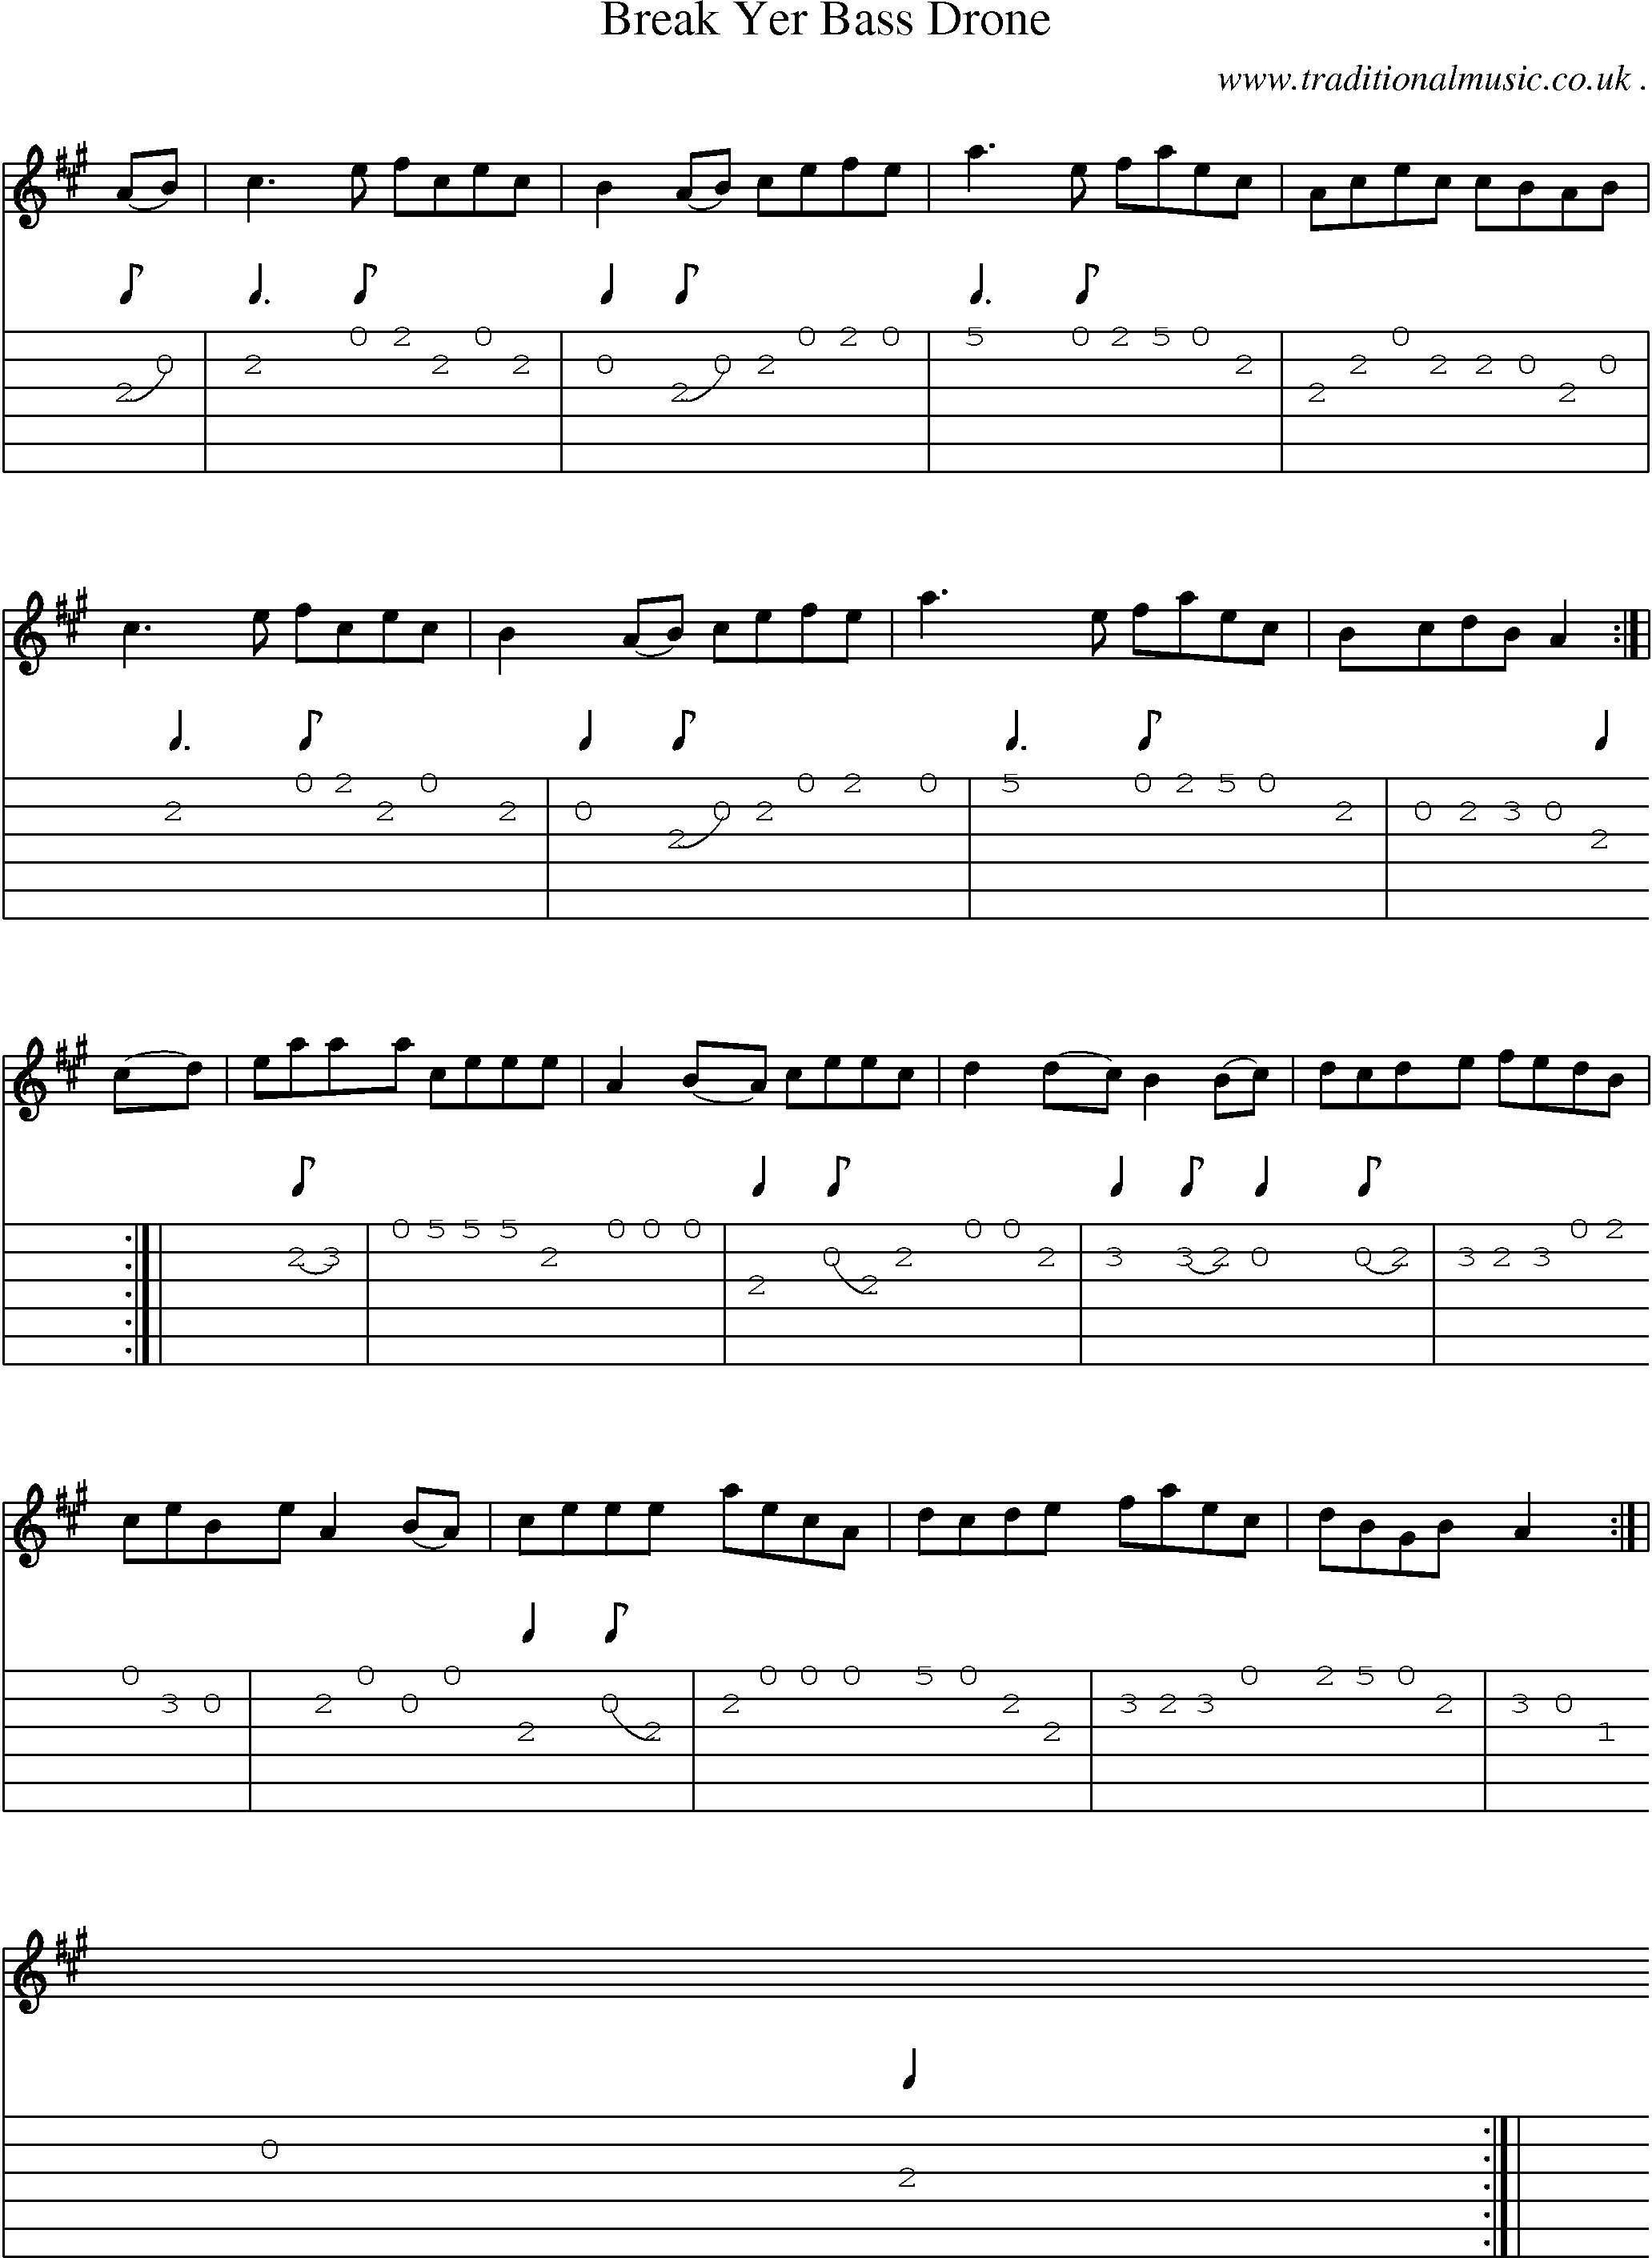 Sheet-music  score, Chords and Guitar Tabs for Break Yer Bass Drone